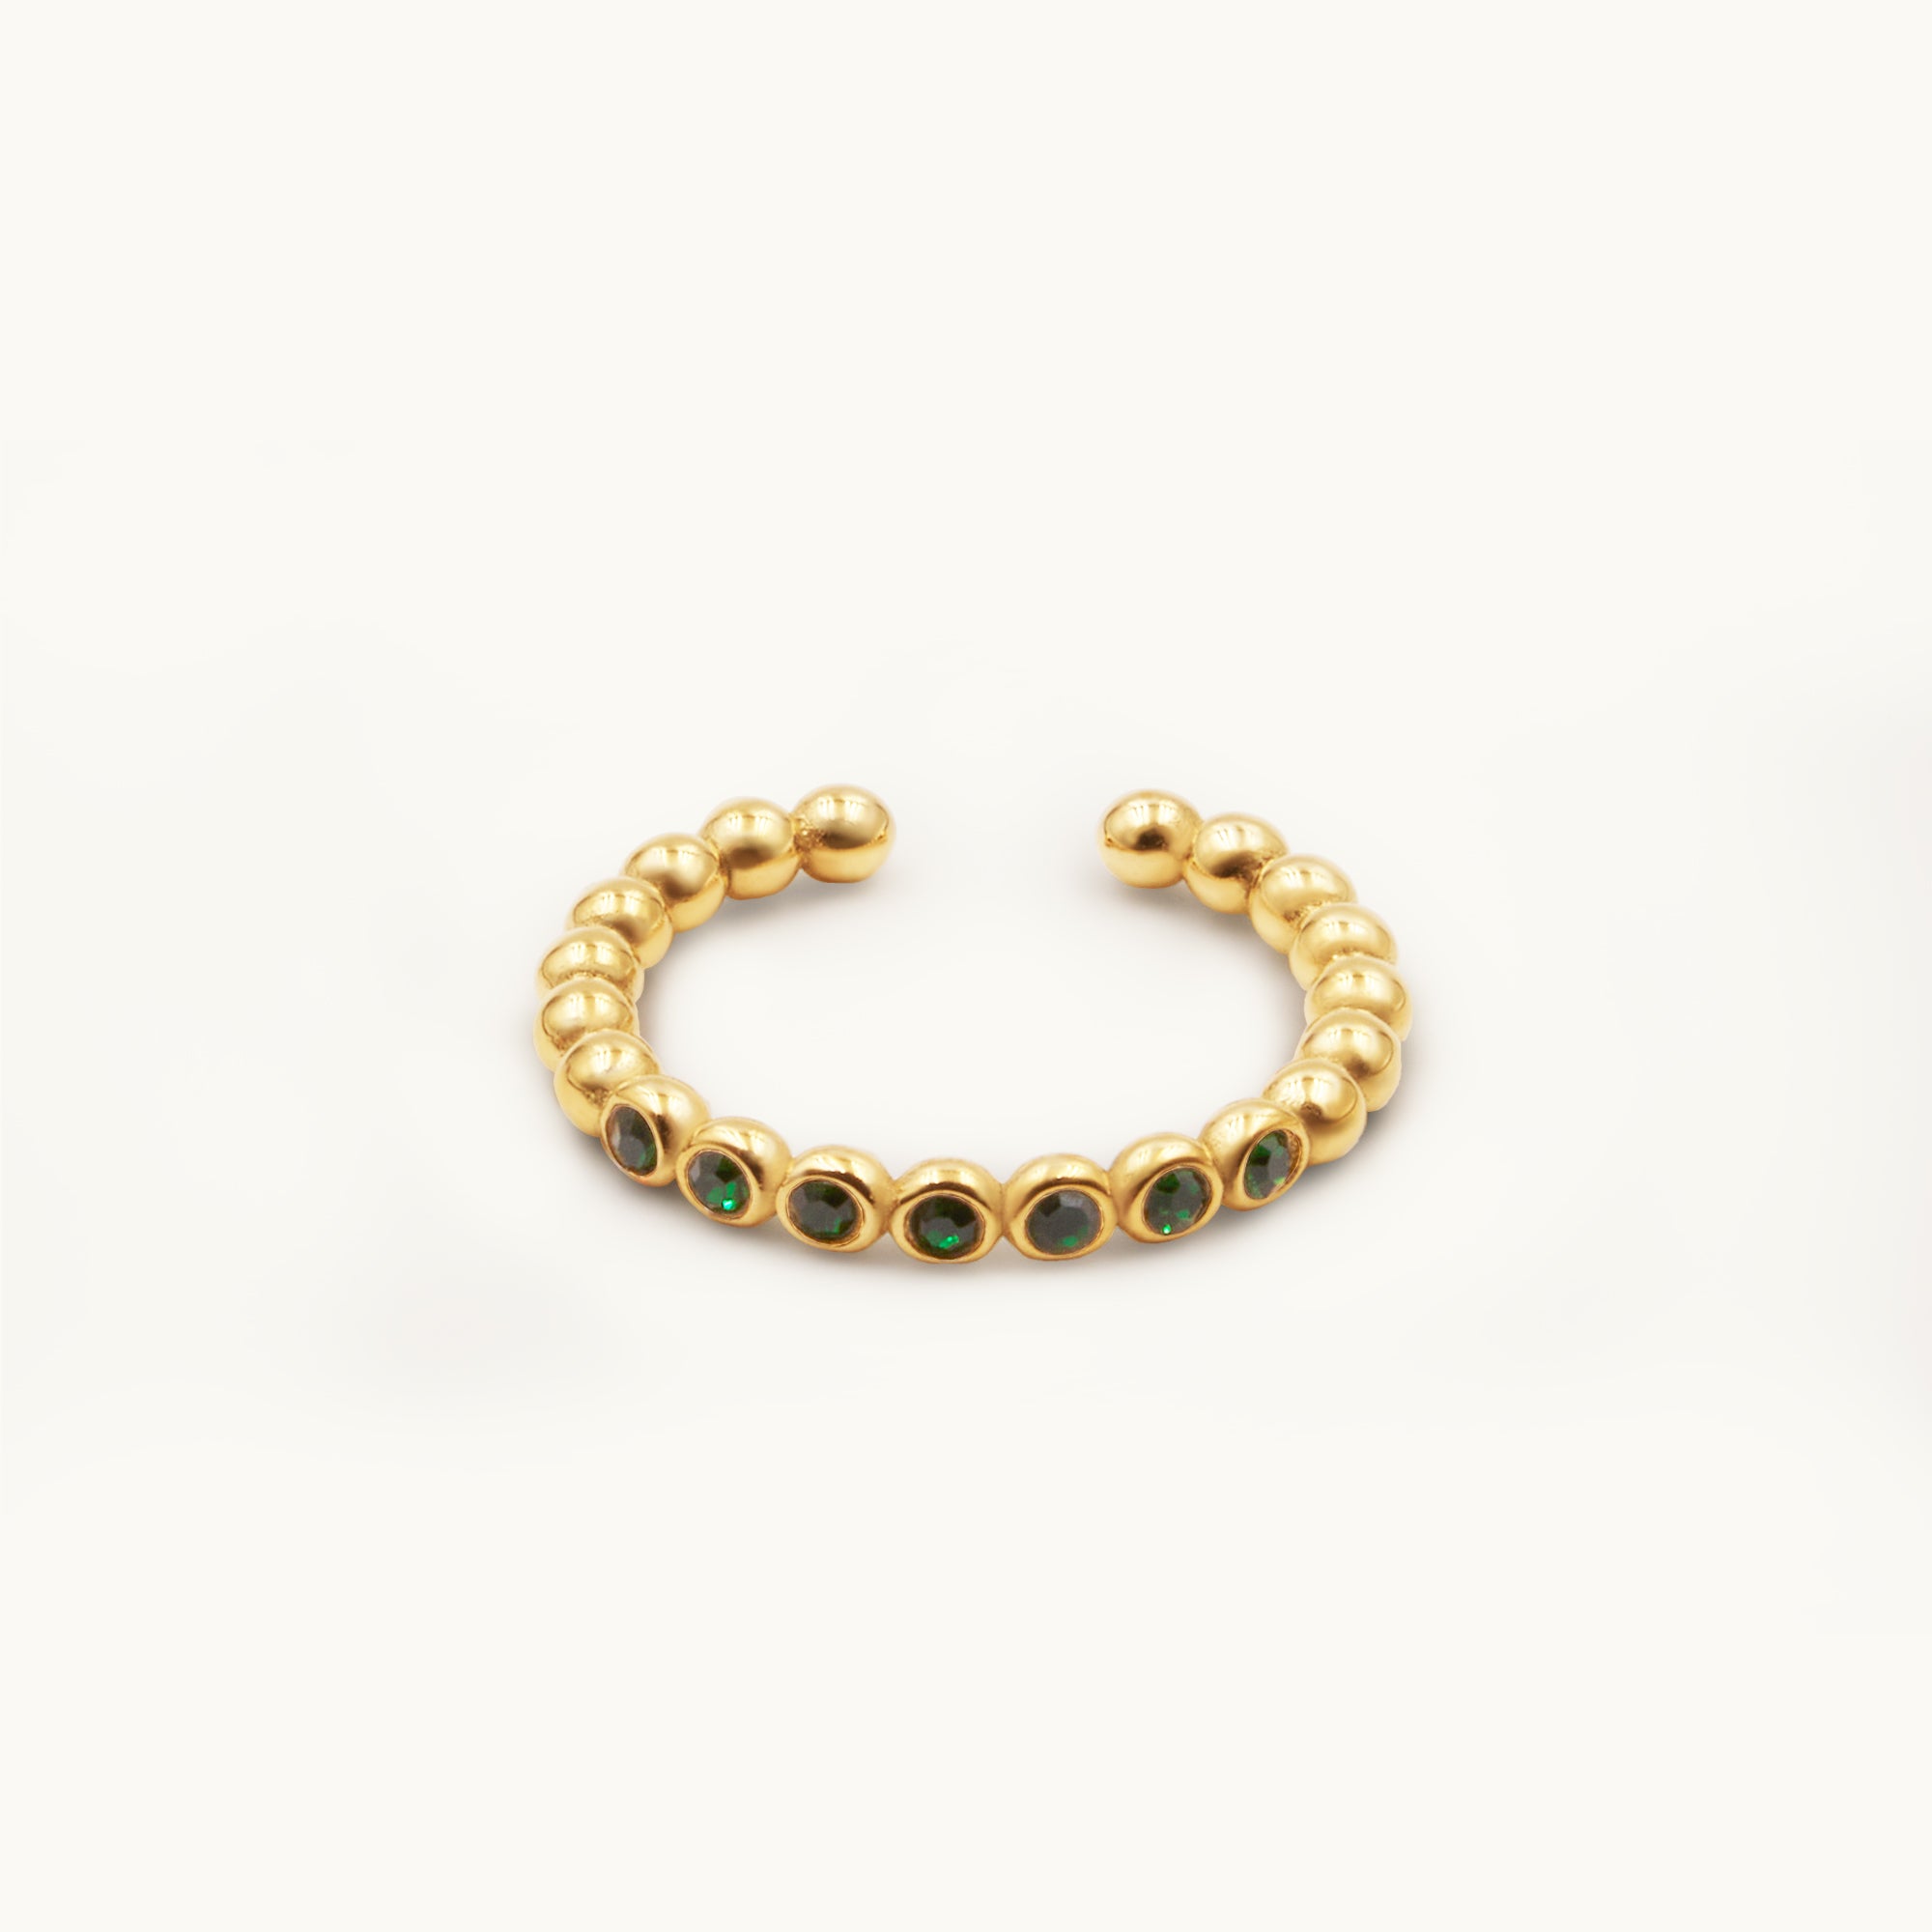 STACK THE GOLD BEADS INLAID ZIRCON RING, GREEN